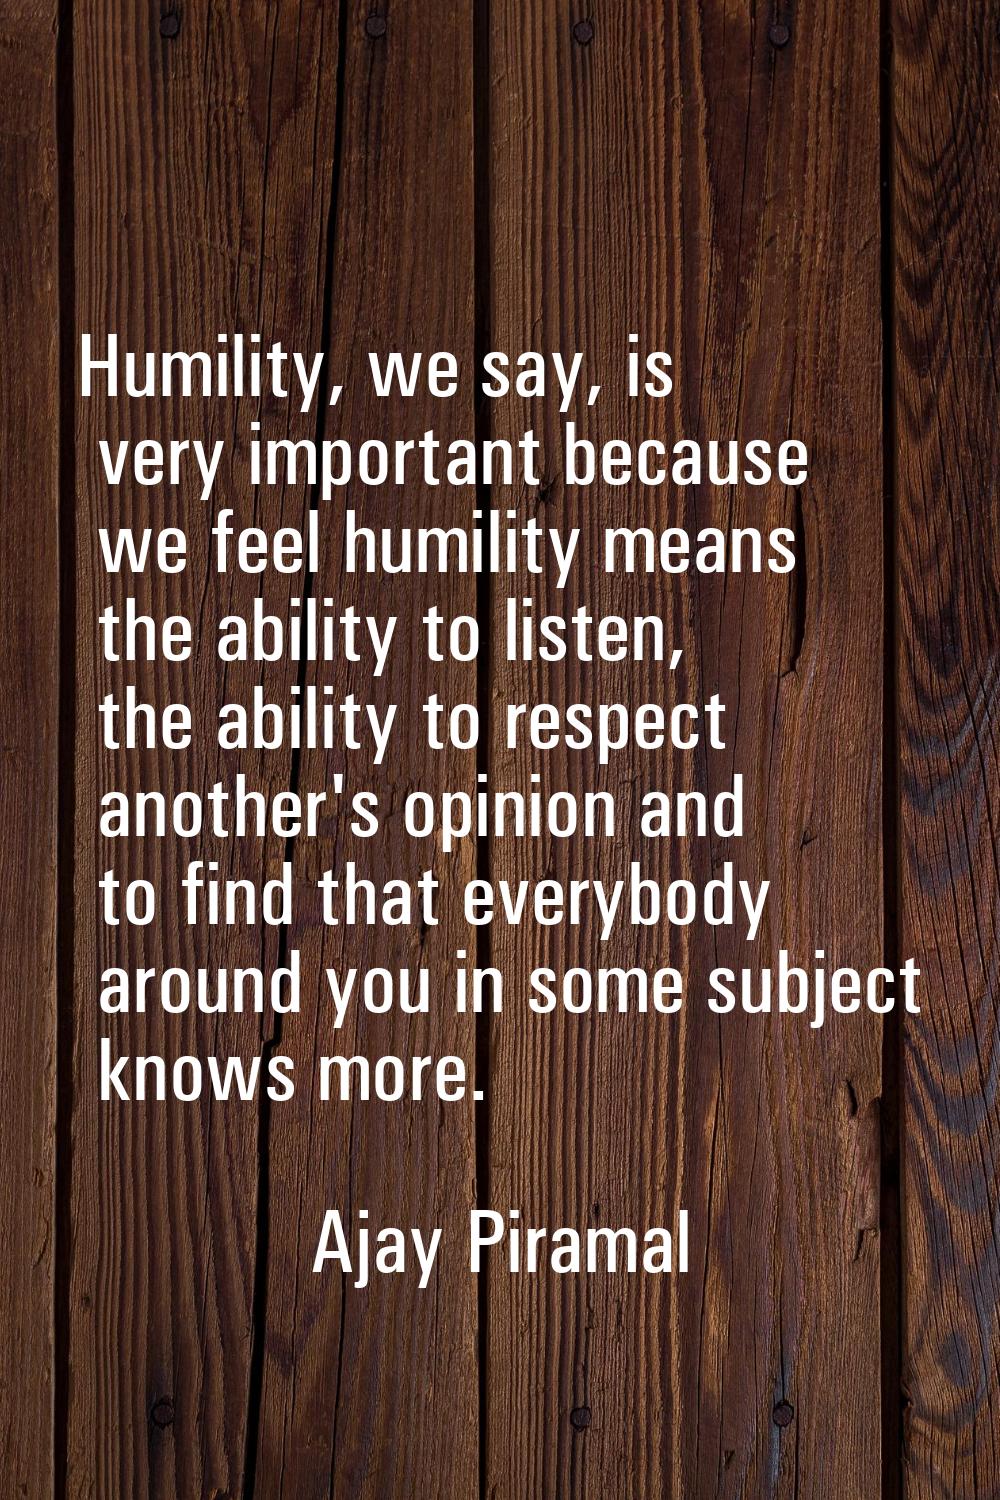 Humility, we say, is very important because we feel humility means the ability to listen, the abili